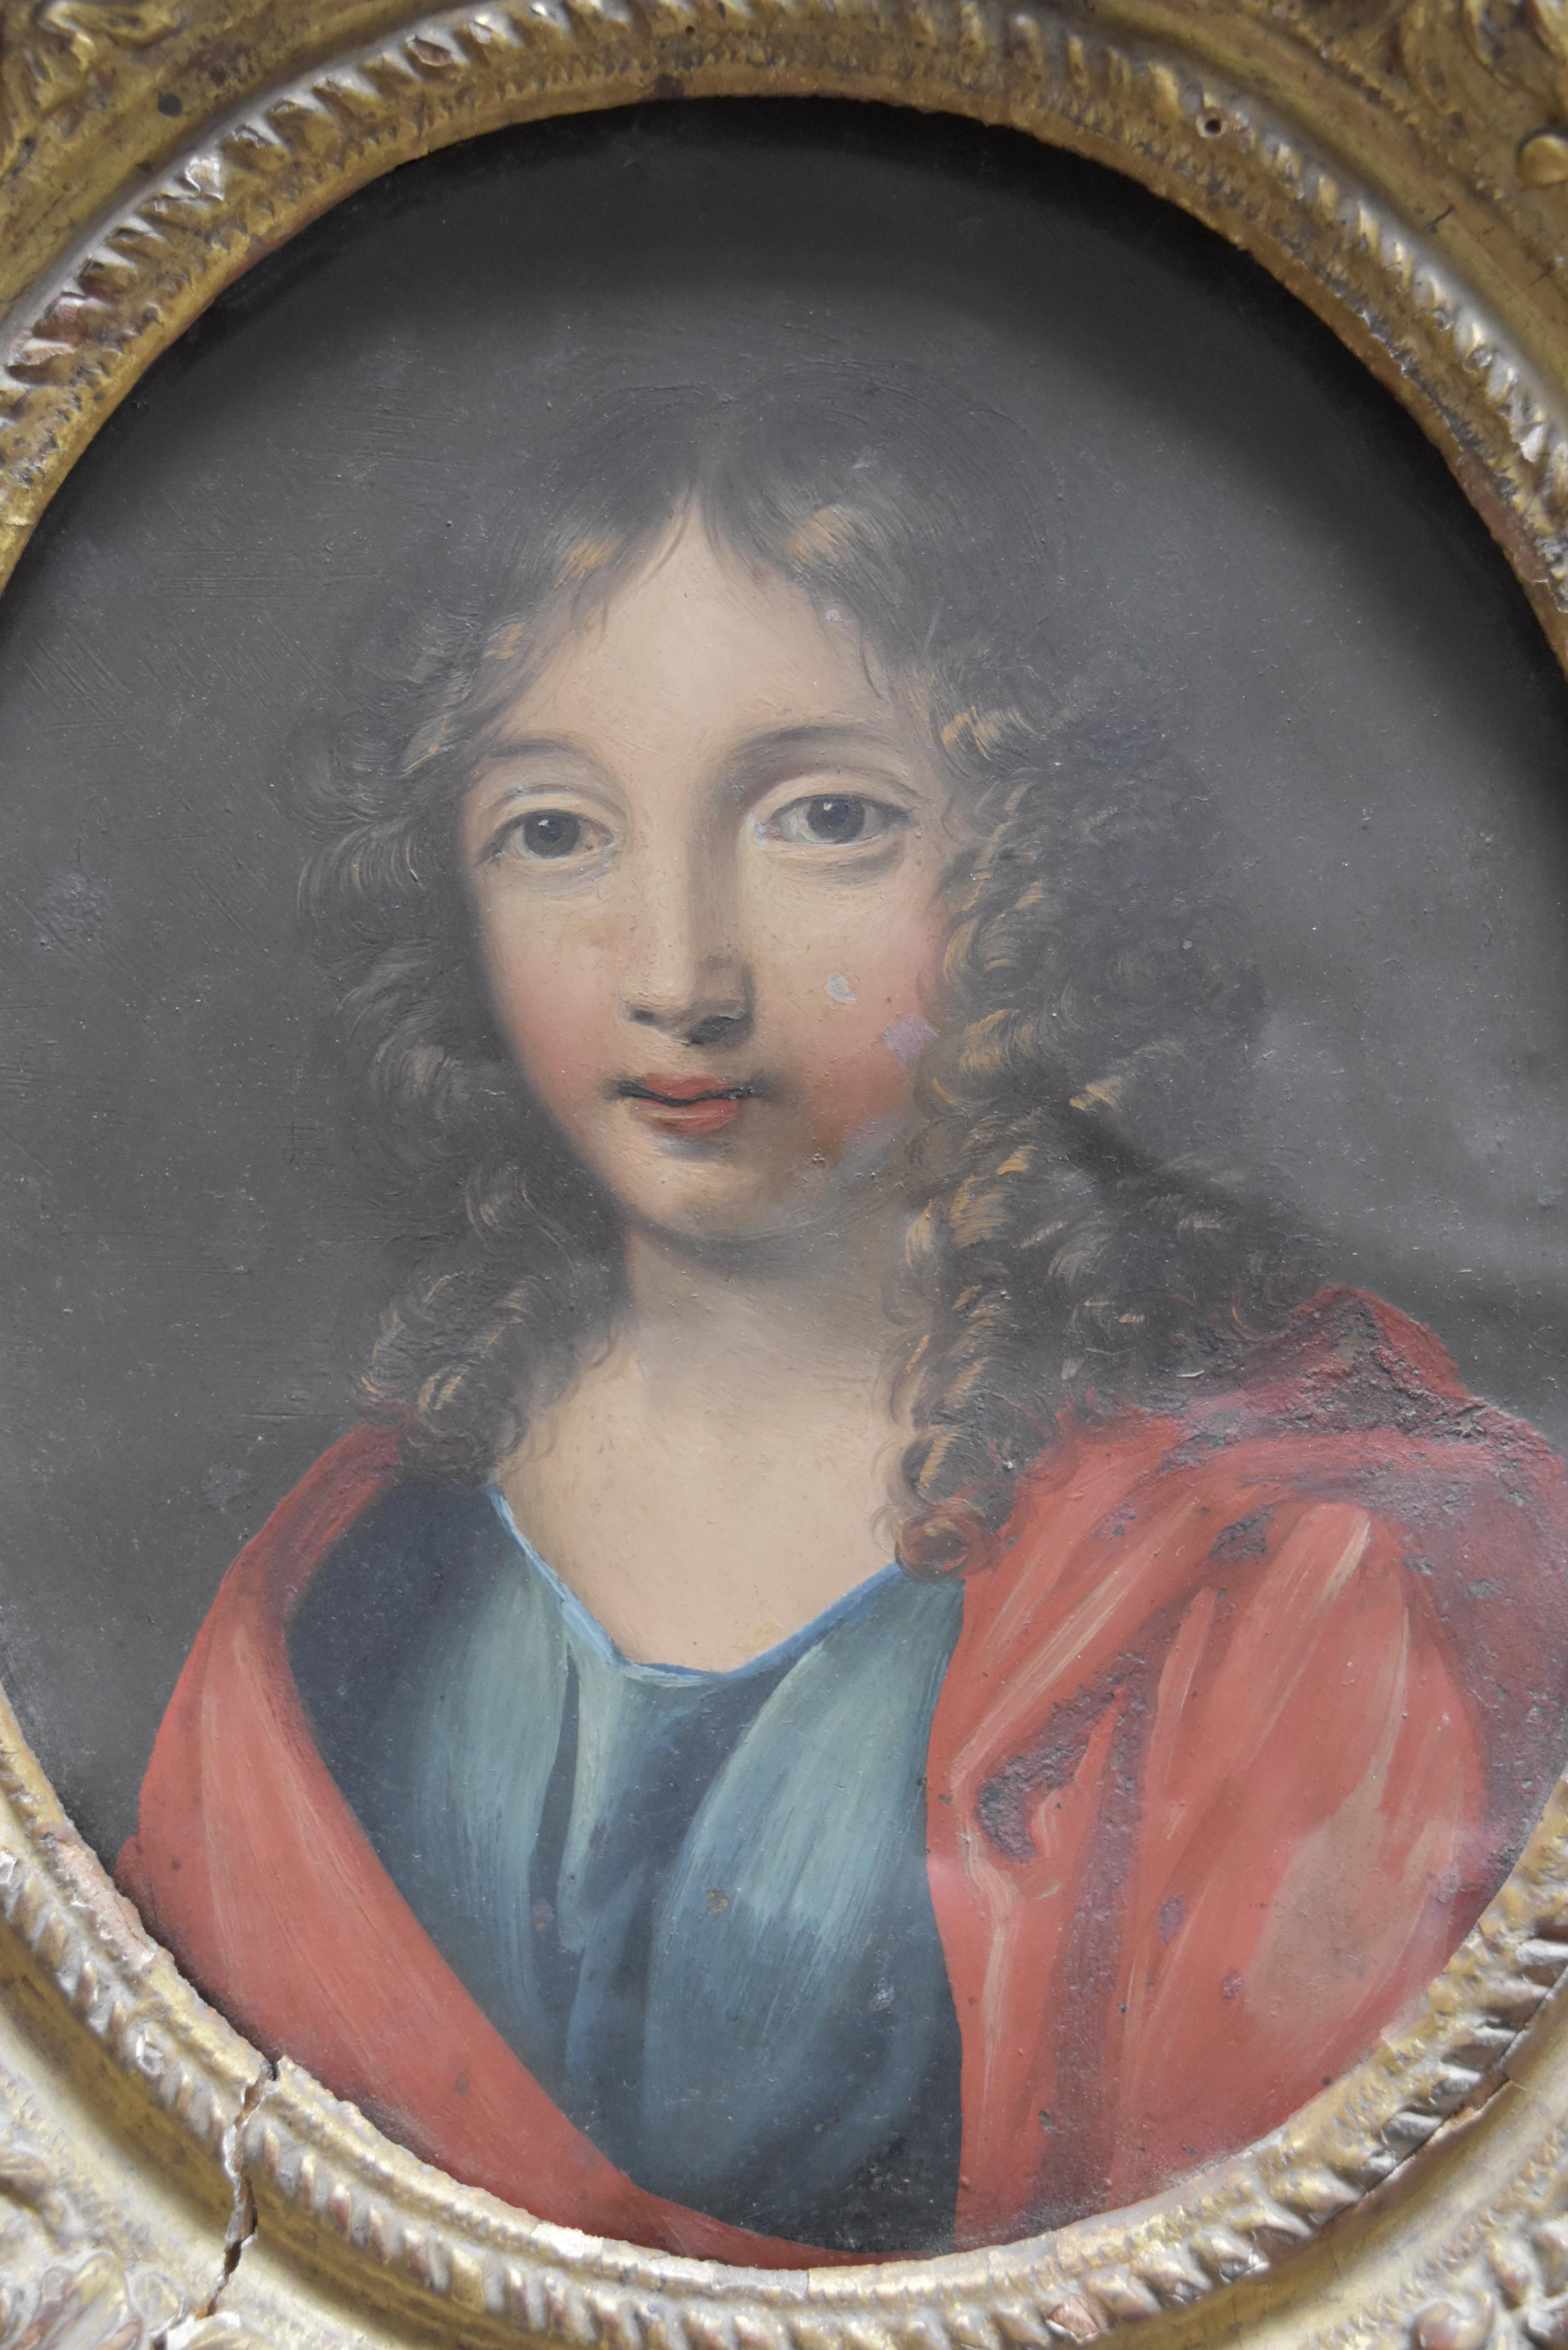 France 17th Century, Saint John the Evangelist, oil on copper - Painting by Unknown